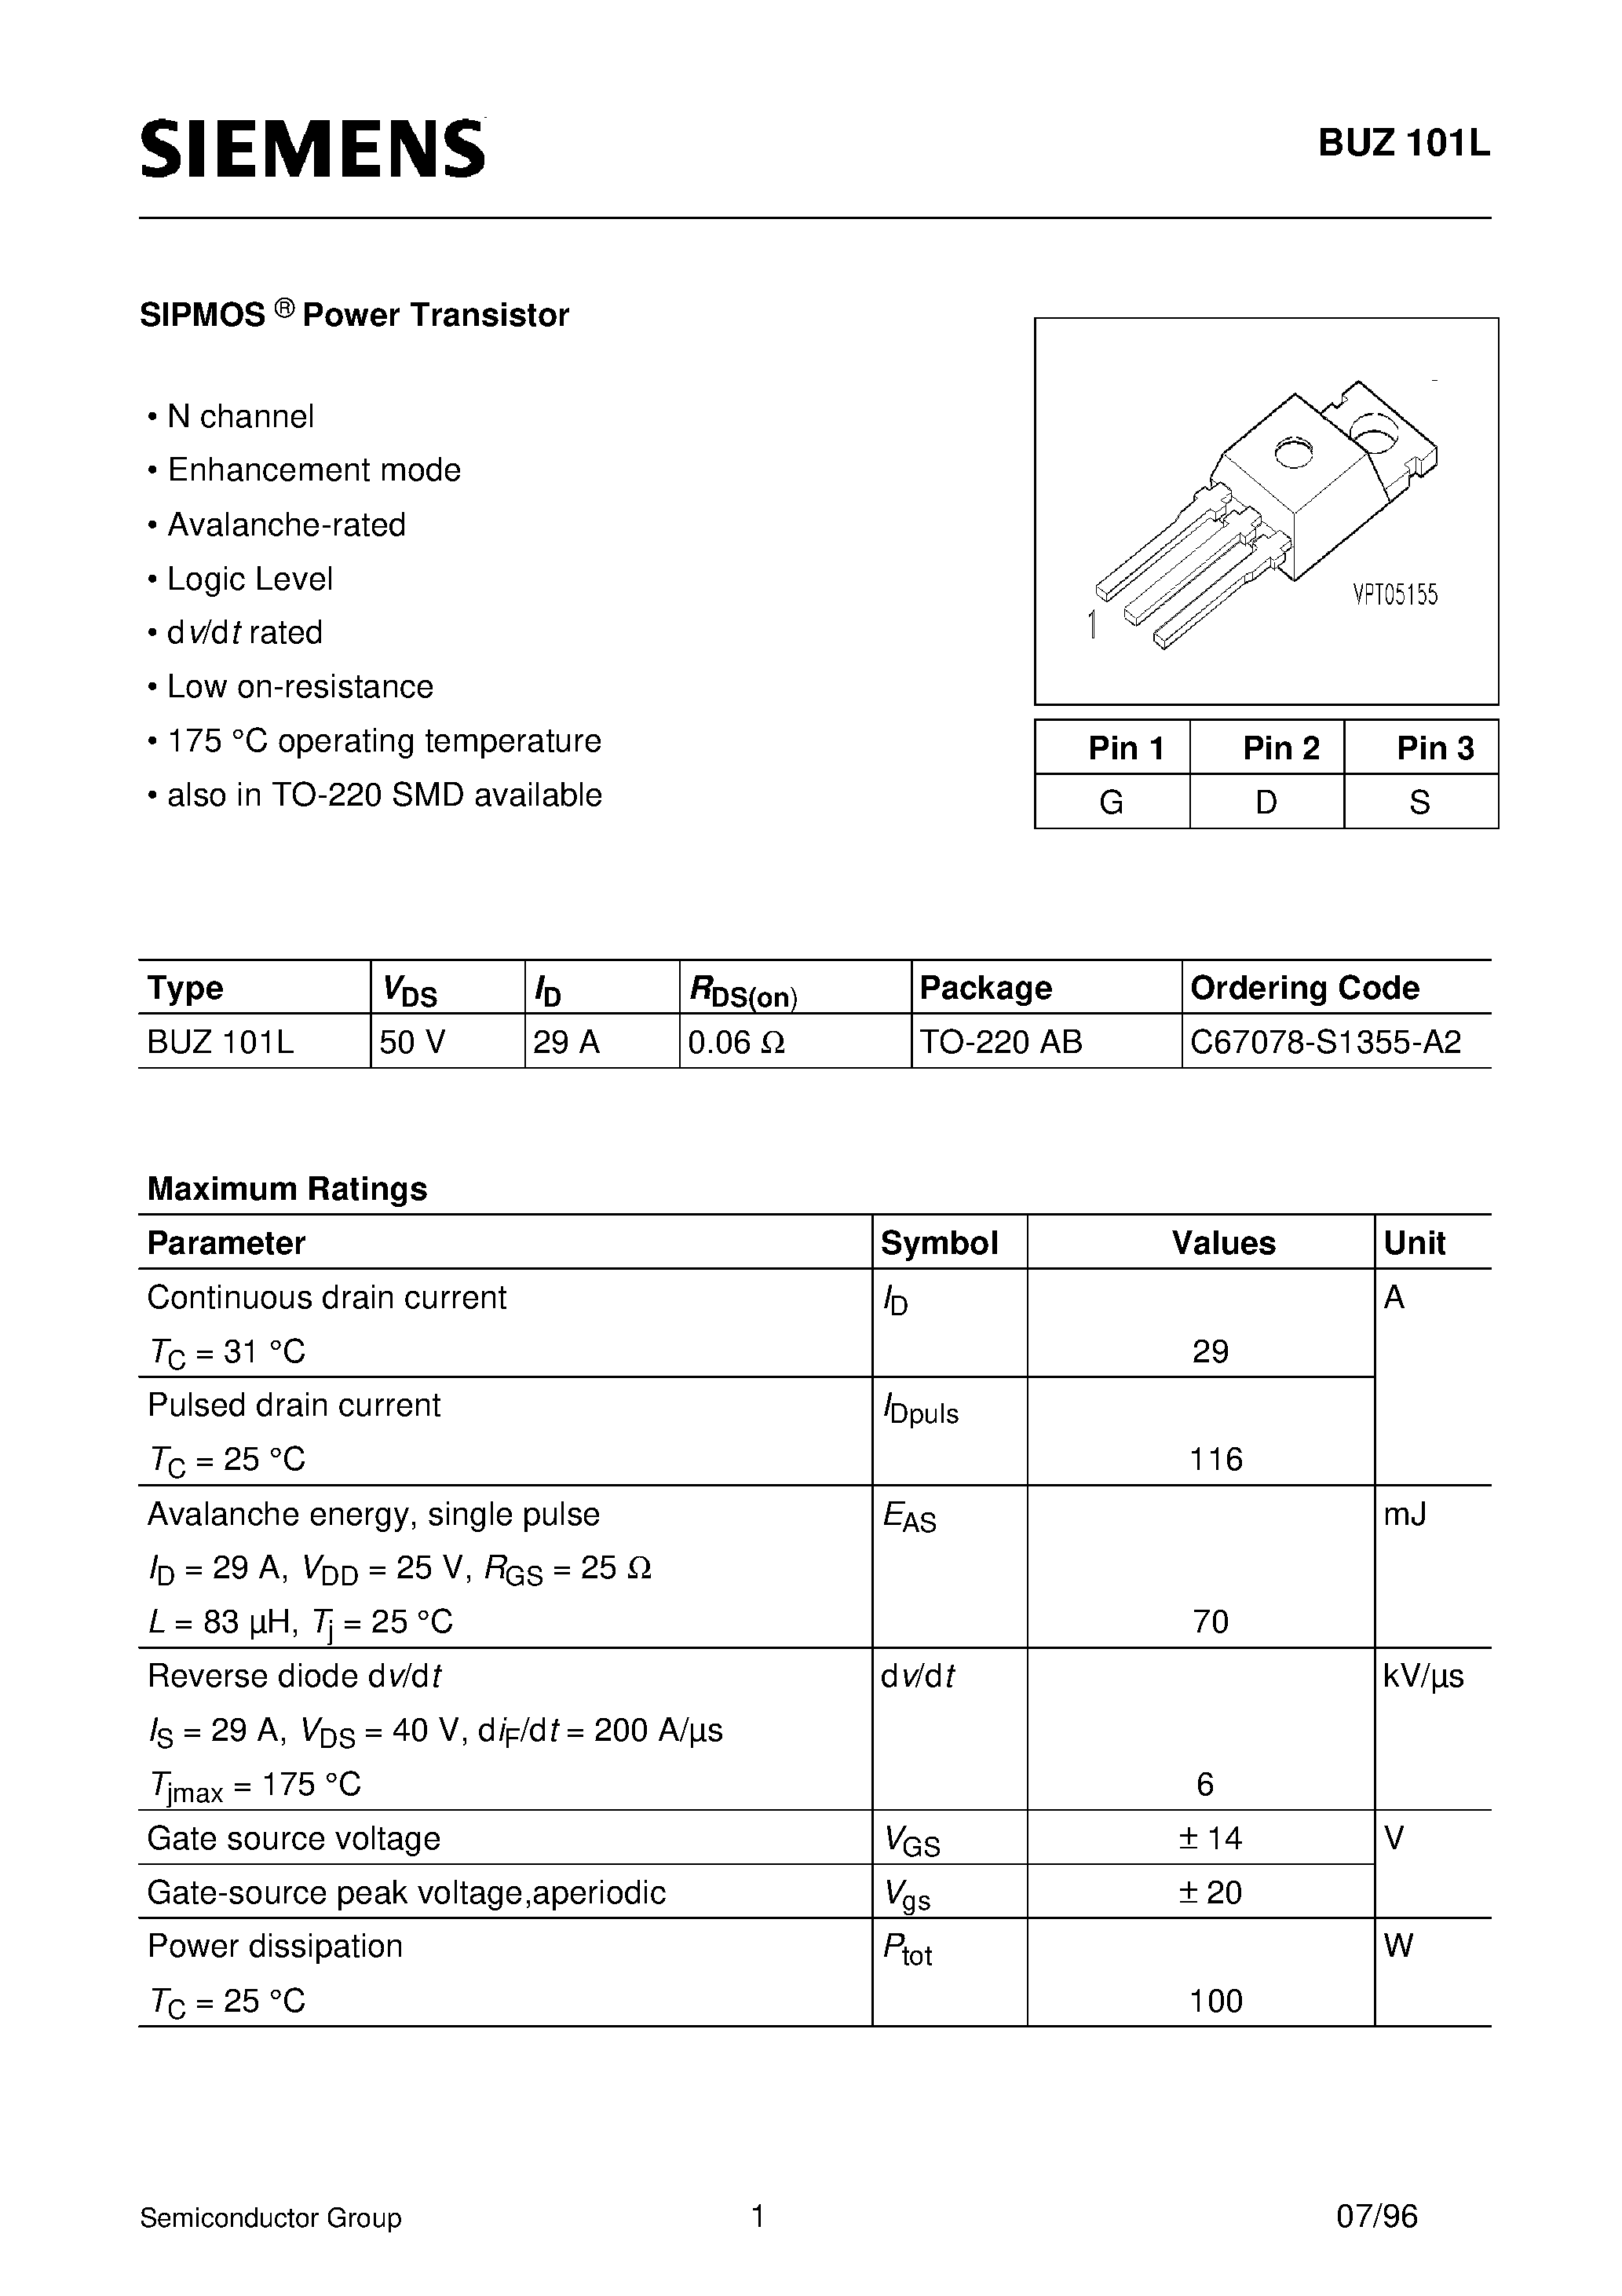 Datasheet BUZ101L - SIPMOS Power Transistor (N channel Enhancement mode Avalanche-rated Logic Level) page 1